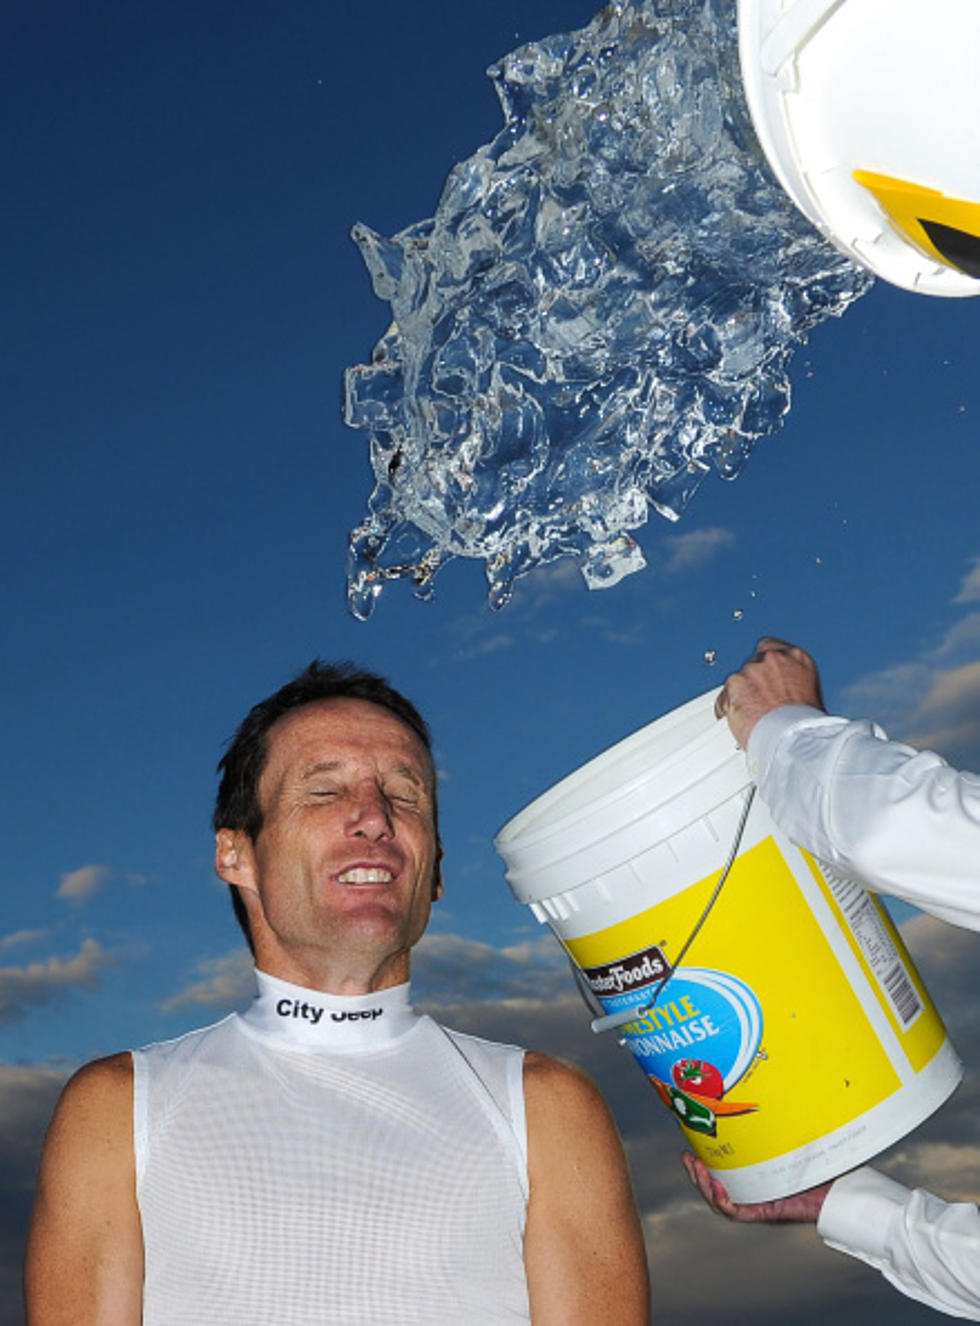 Ice Bucket Challenge: How Non-Profits Could Change How They Raise Funds